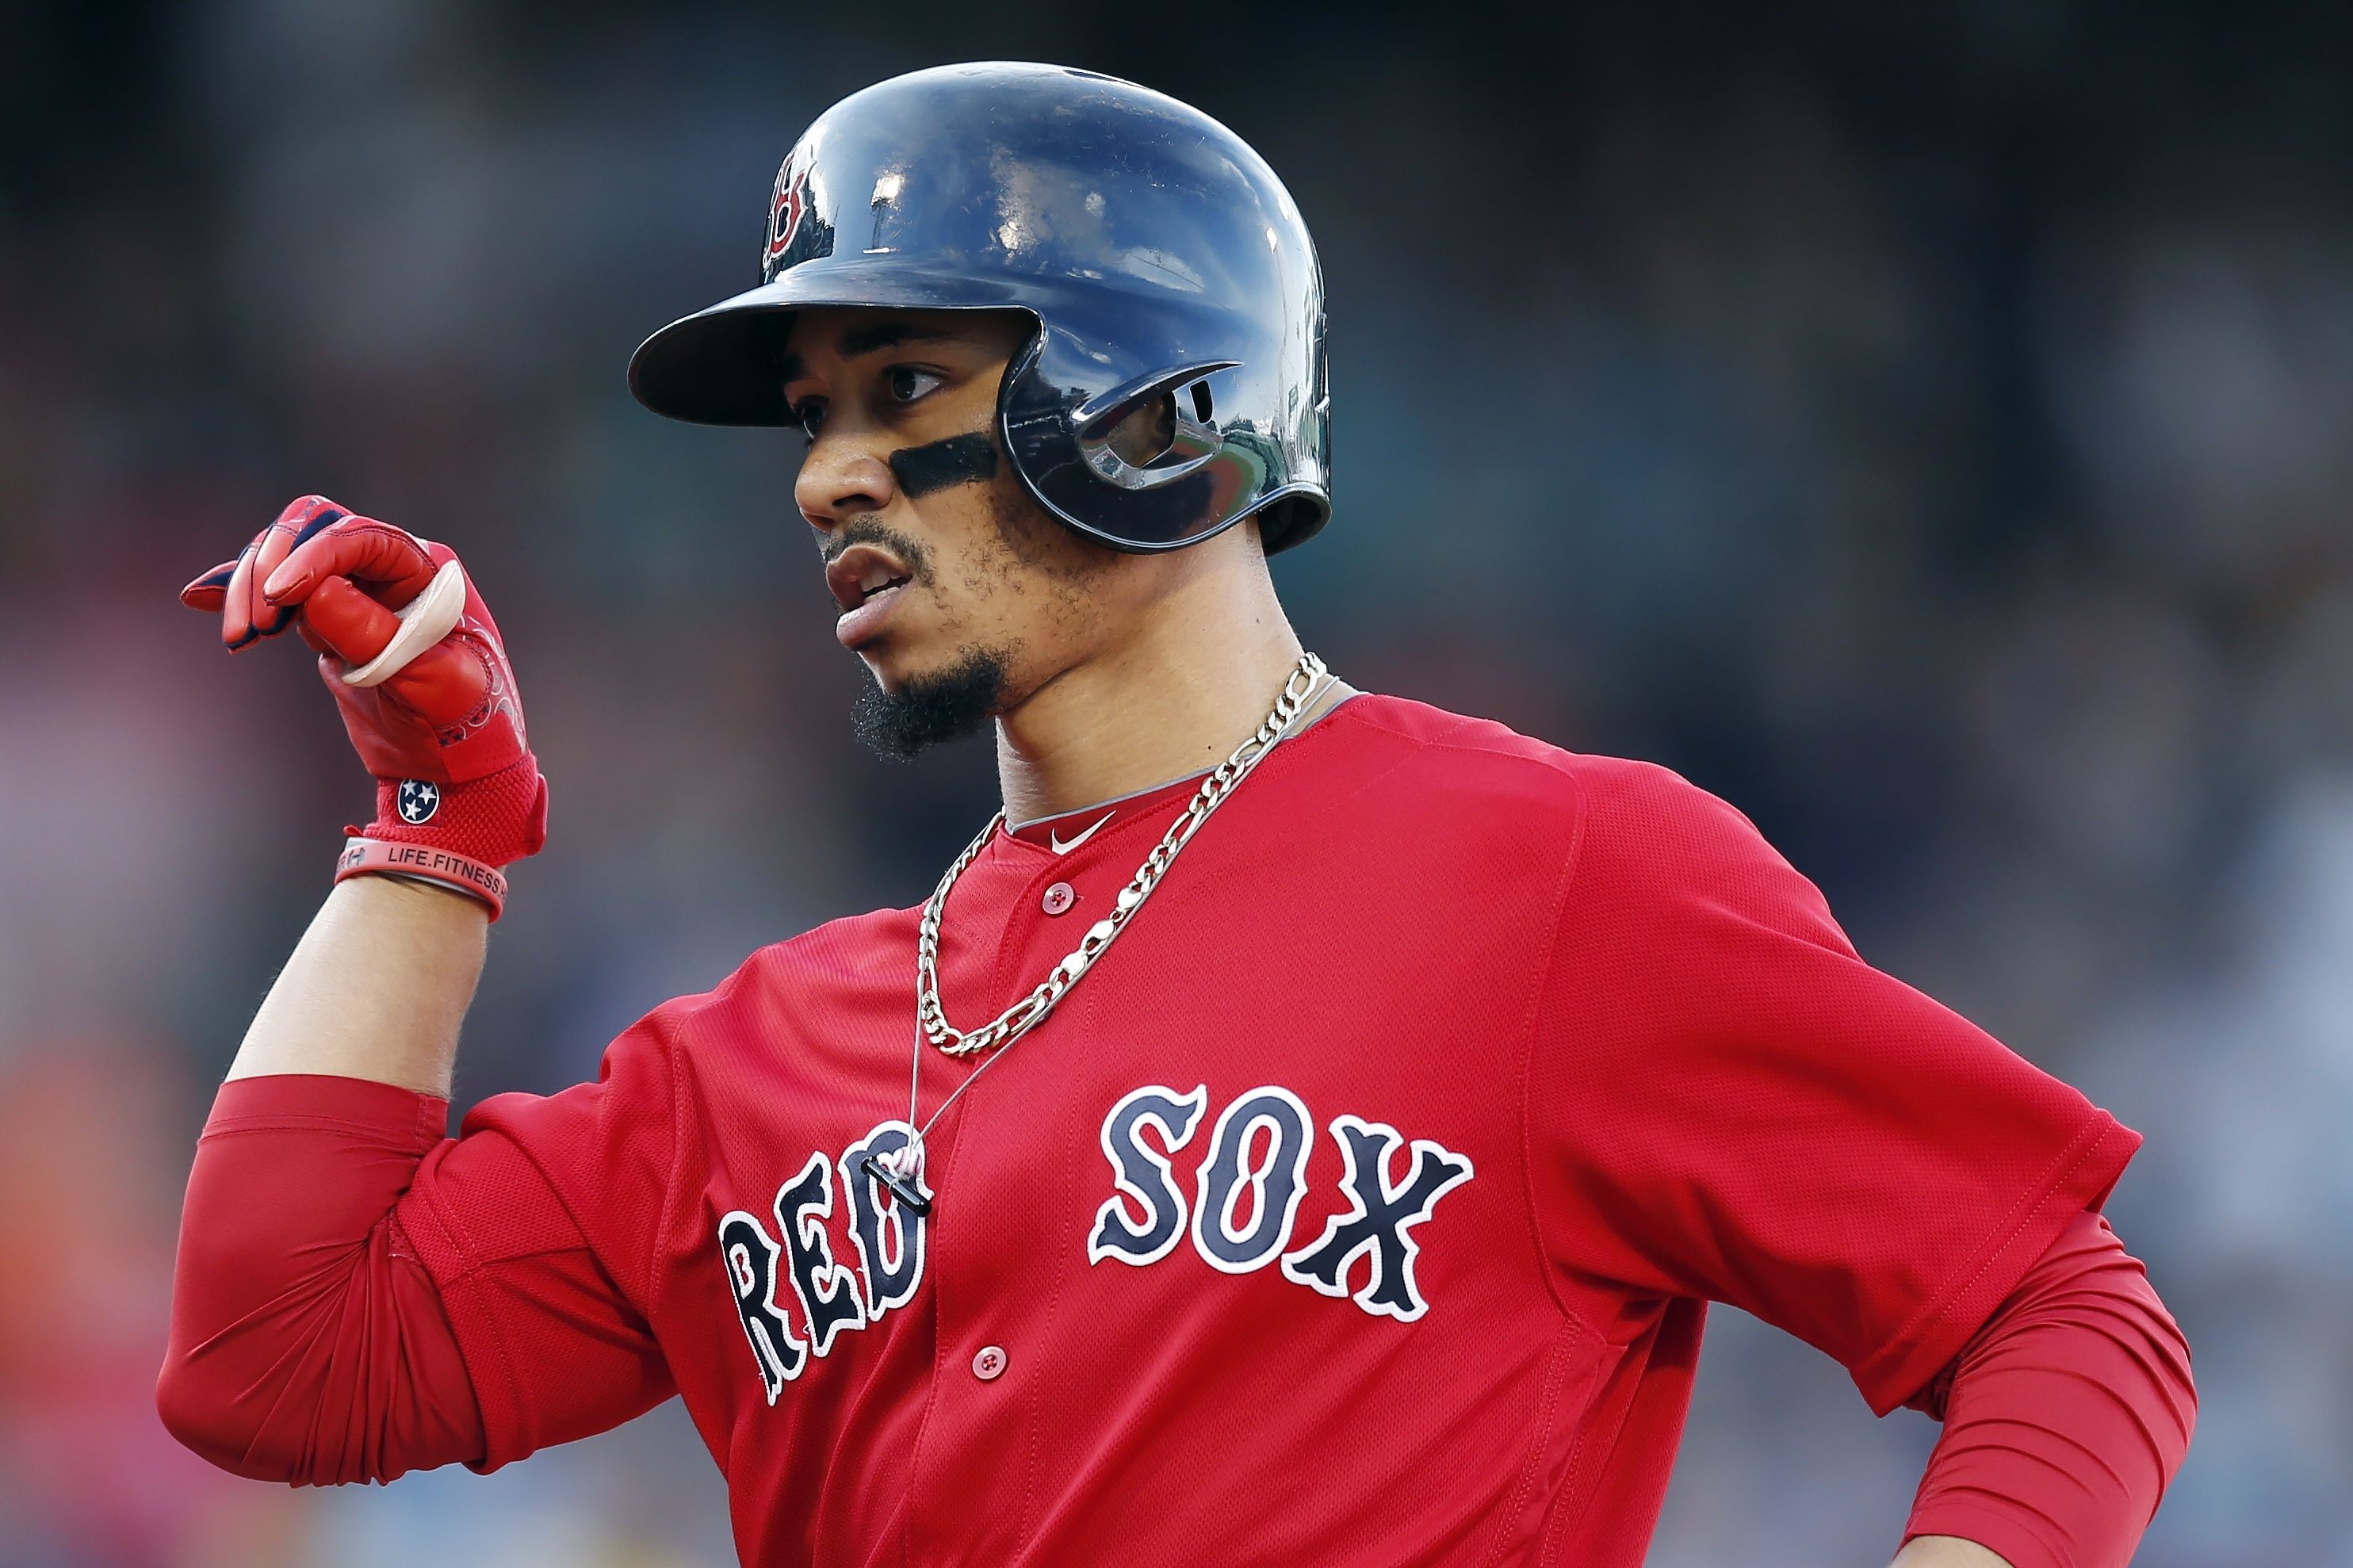 WATCH: Red Sox outfielder Mookie Betts bowls a perfect 300 at the